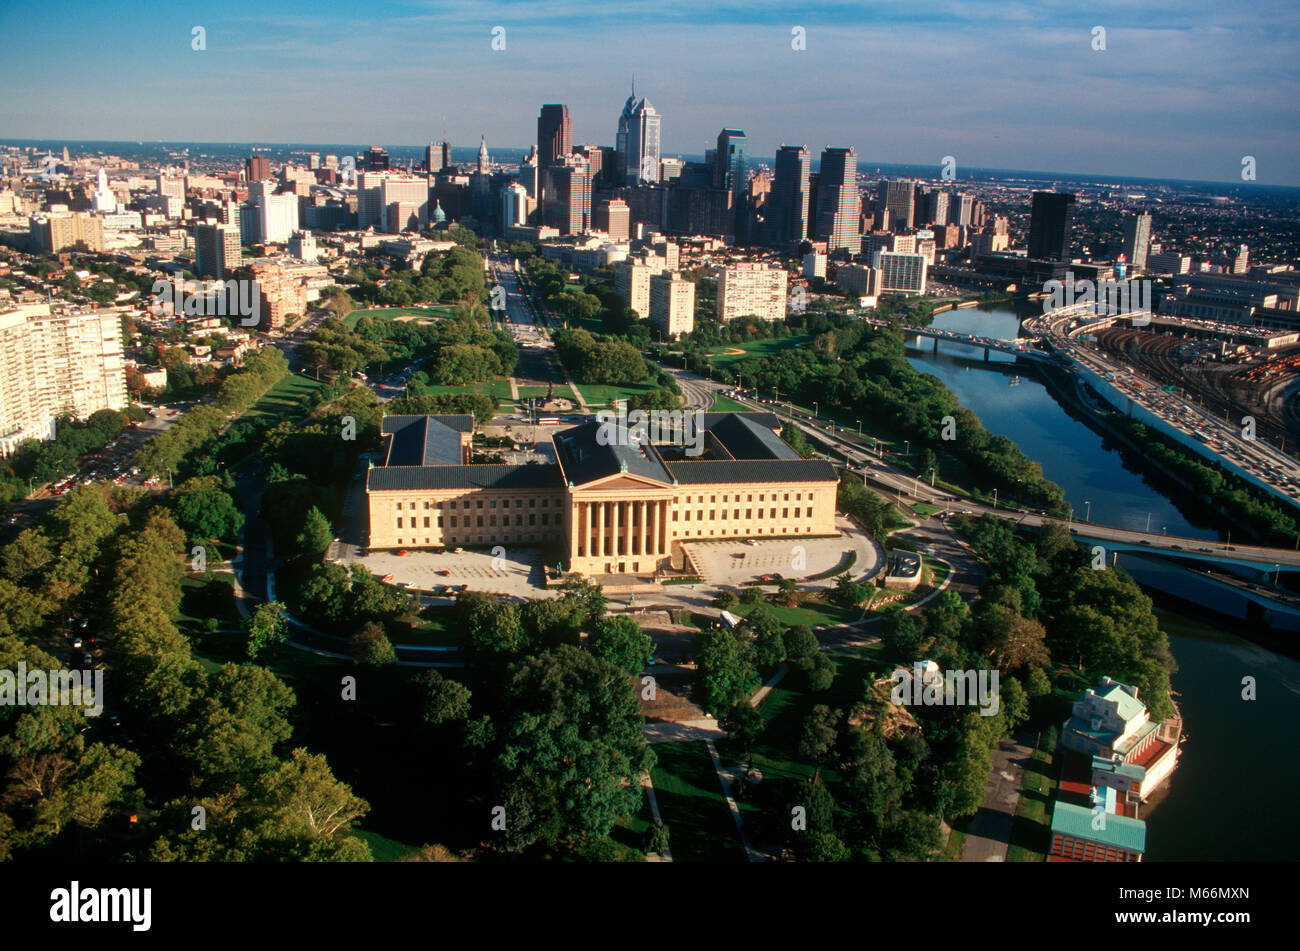 1990s 1994 AERIAL VIEW OF PHILADELPHIA SKYLINE ART MUSEUM IN FOREGROUND PHILADELPHIA PENNSYLVANIA - kp6135 DEG002 HARS SINGLE OBJECT STRUCTURE NEIGHBORHOOD EXTERIOR NOBODY PA SCHUYLKILL NORTHEAST 1990s REAL ESTATE EAST COAST DAYTIME KEYSTONE STATE DAYLIGHT TRAVEL PENNSYLVANIA DELAWARE VALLEY DWELLING OVERHEAD VIEW SEVERAL 1994 AERIAL VIEW BROTHERLY LOVE CITY OF BROTHERLY LOVE CITYSCAPE CRADLE OF LIBERTY EXPRESSWAY FOREGROUND LIBERTY PLACE OLD FASHIONED SCHUYLKILL RIVER Stock Photo